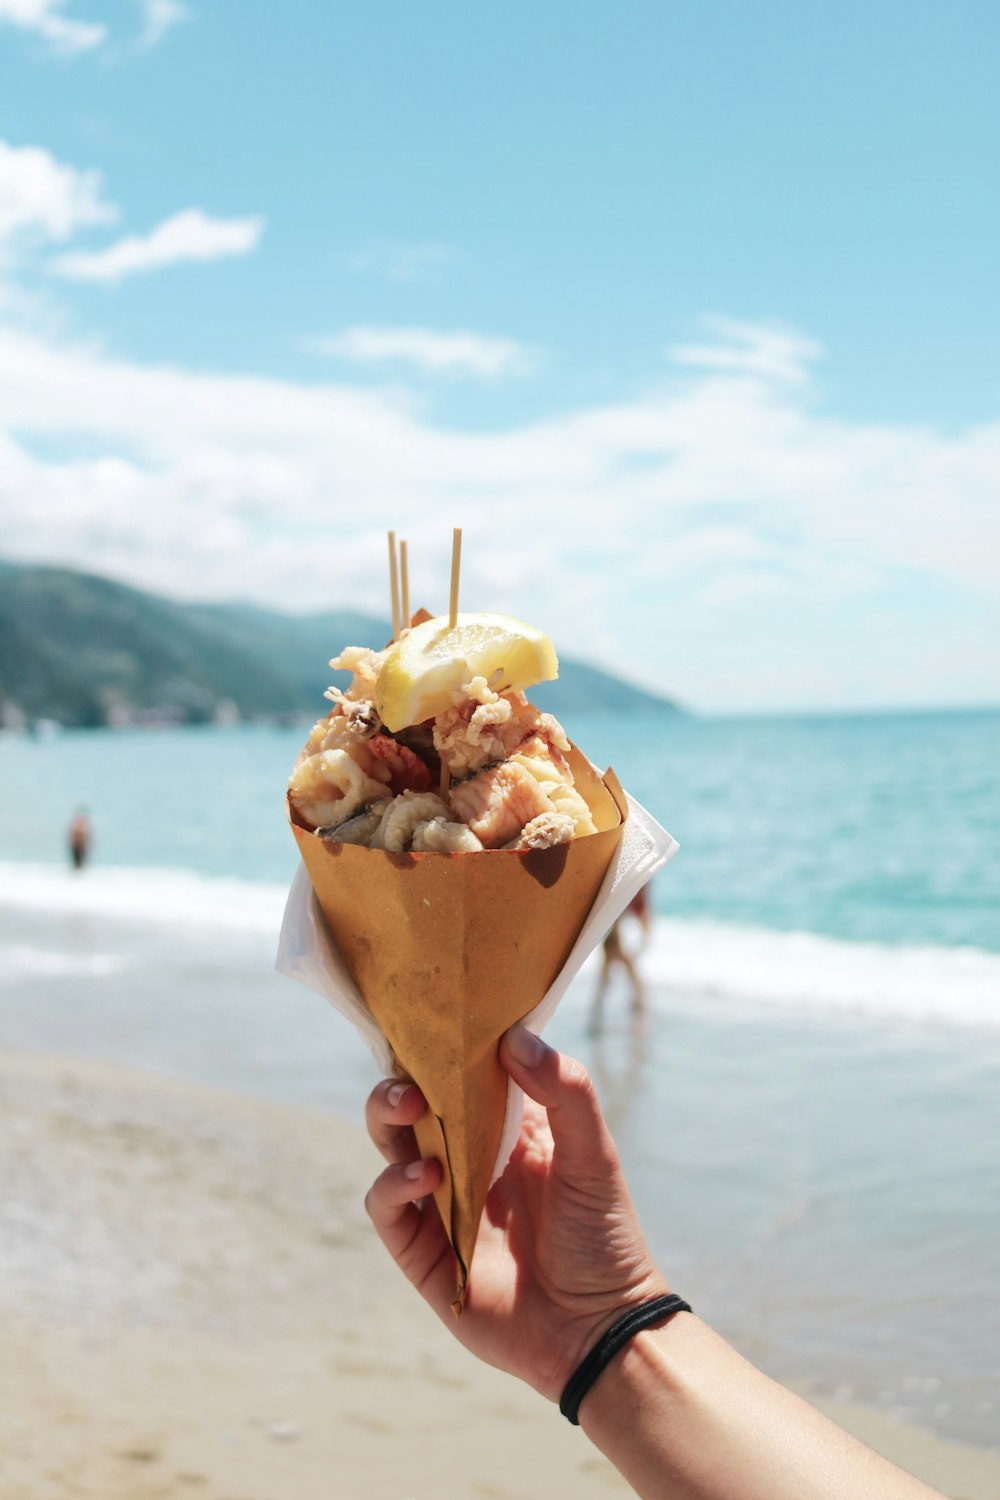 a person holding up a cone of food on a beach